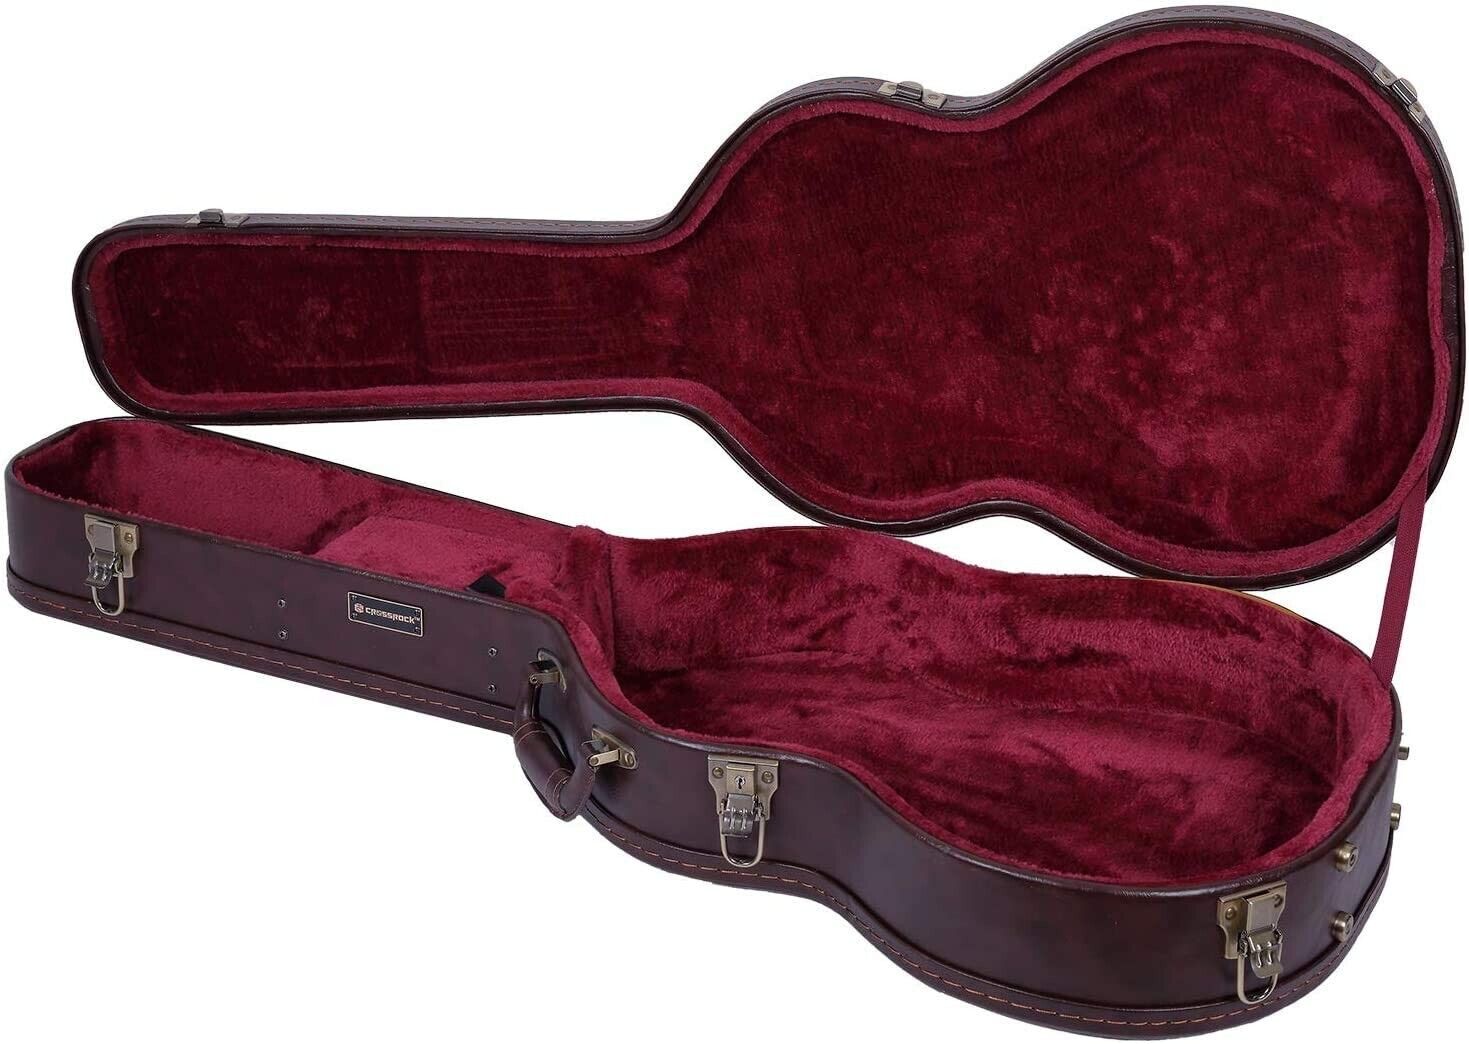 Crossrock 4/4 Full Size Classical Guitar Case, Arch-top Vintage Brown Hardshell